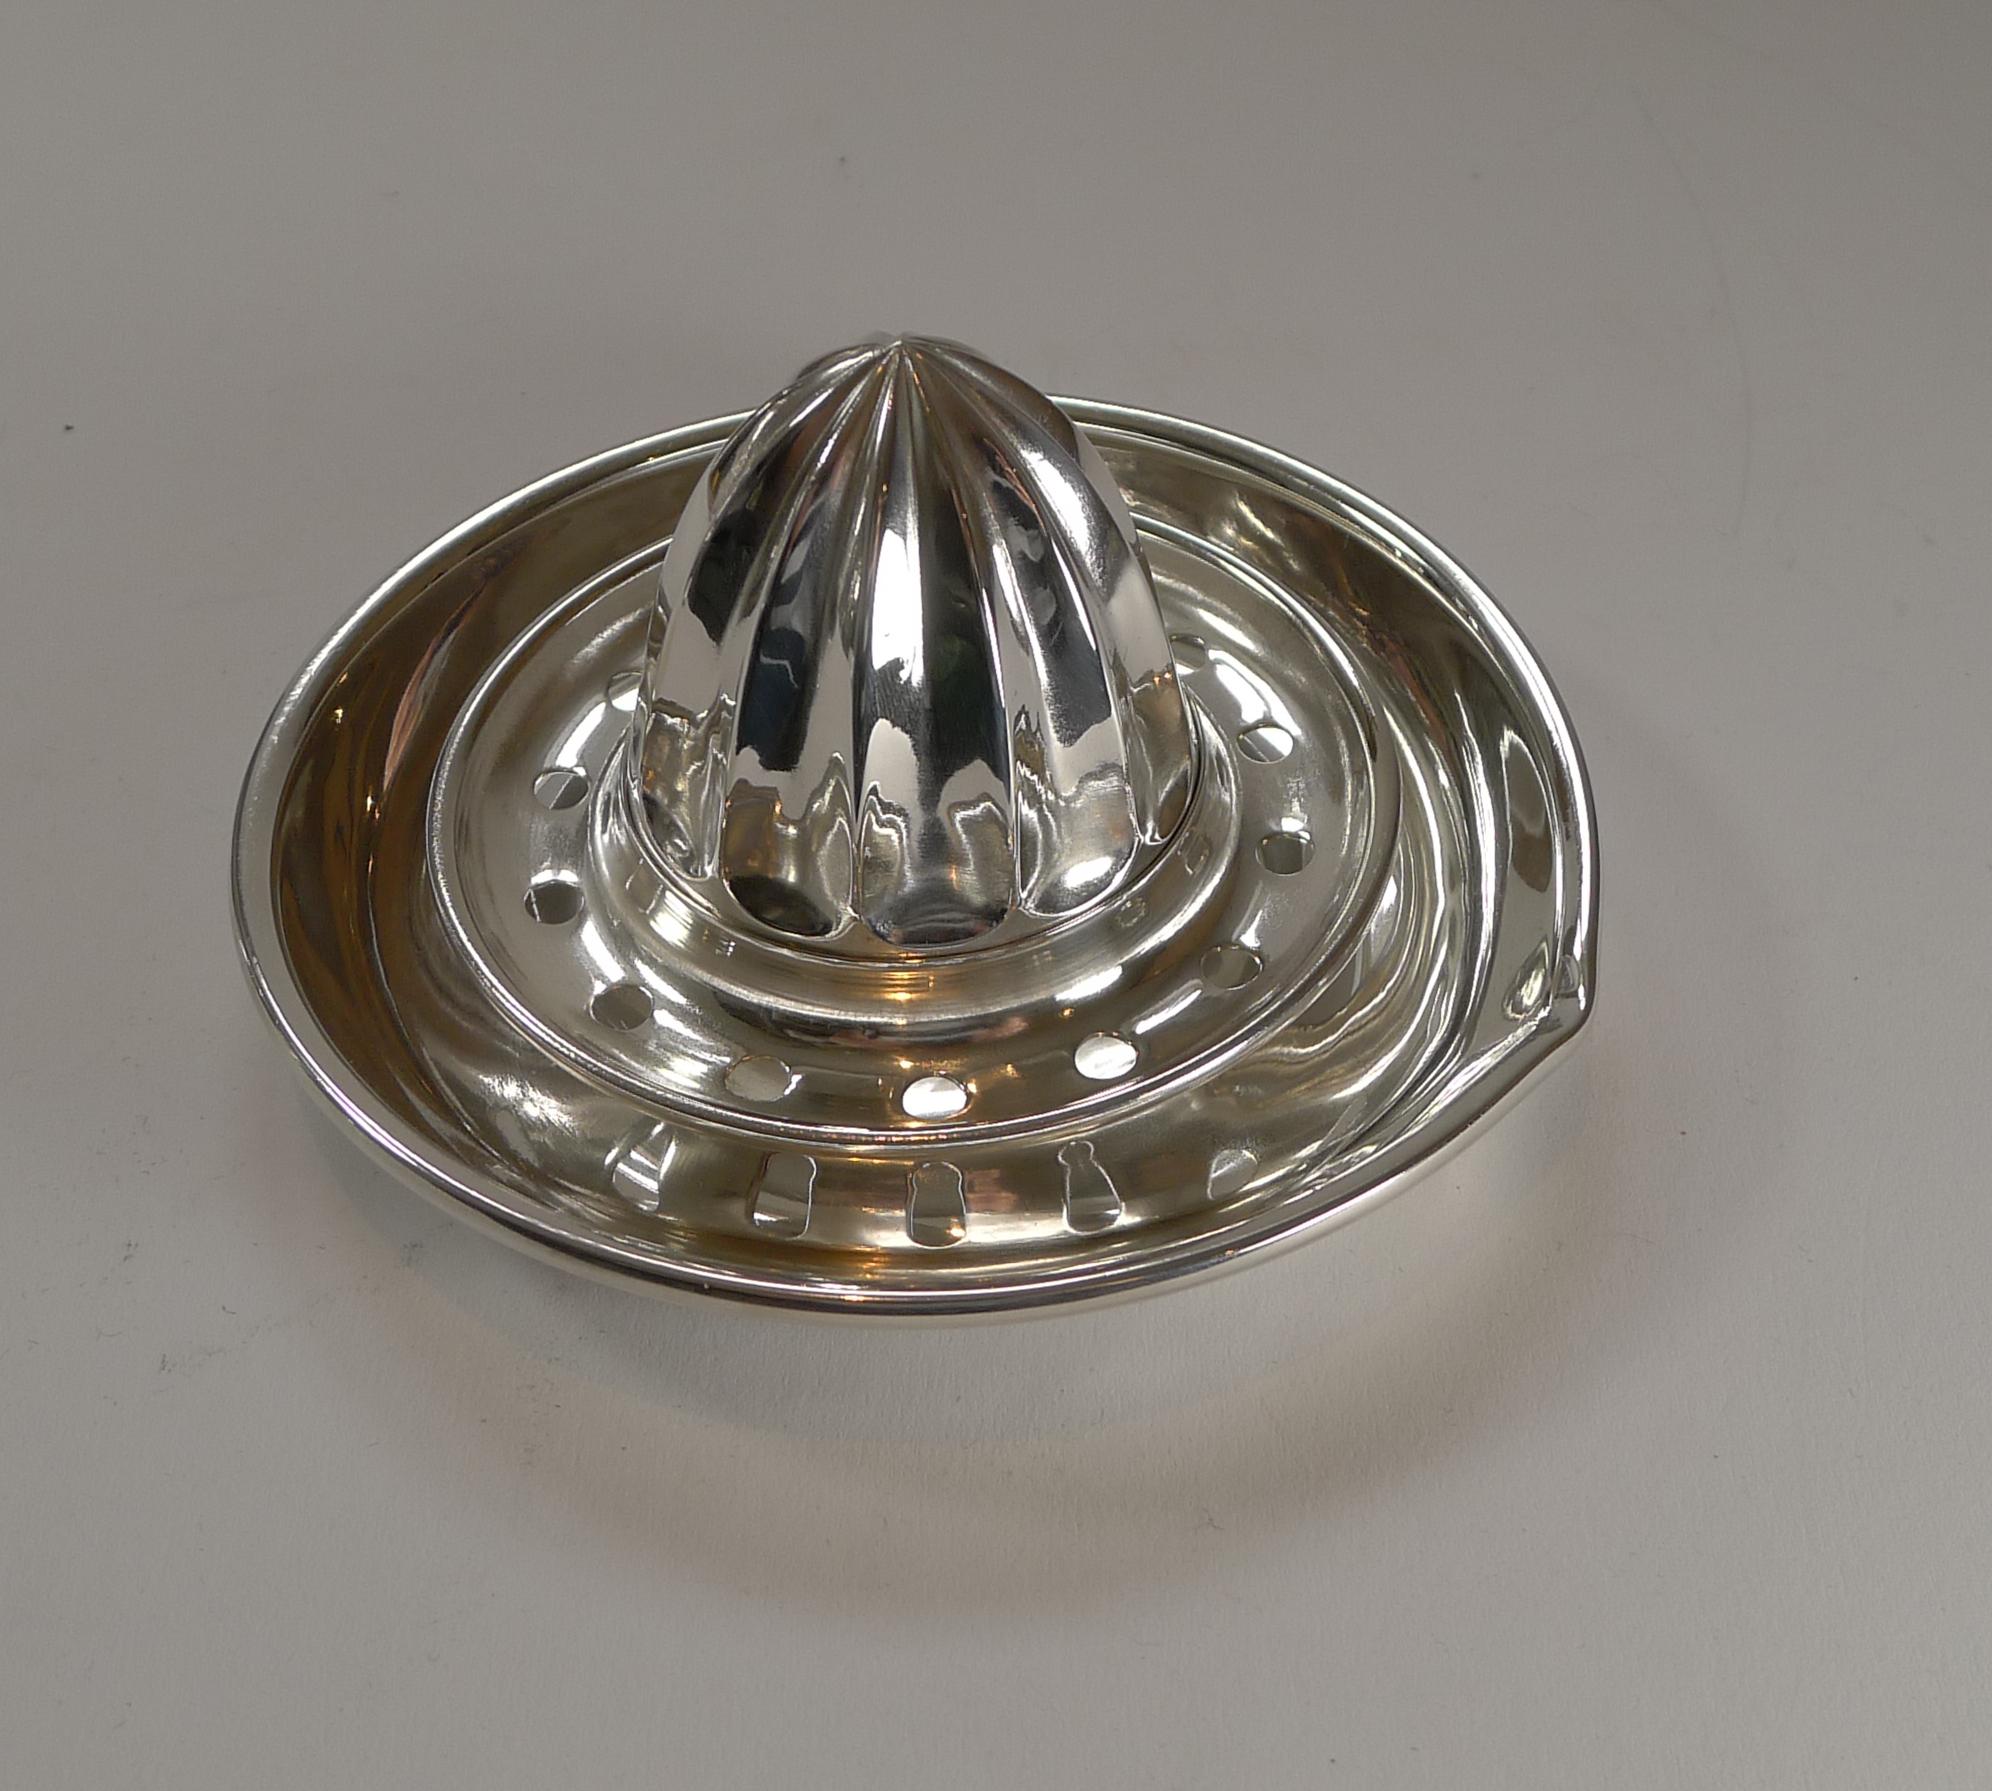 Mid-20th Century English Art Deco Cocktail / Bar Lemon Squeezer in Silver Plate, c.1930